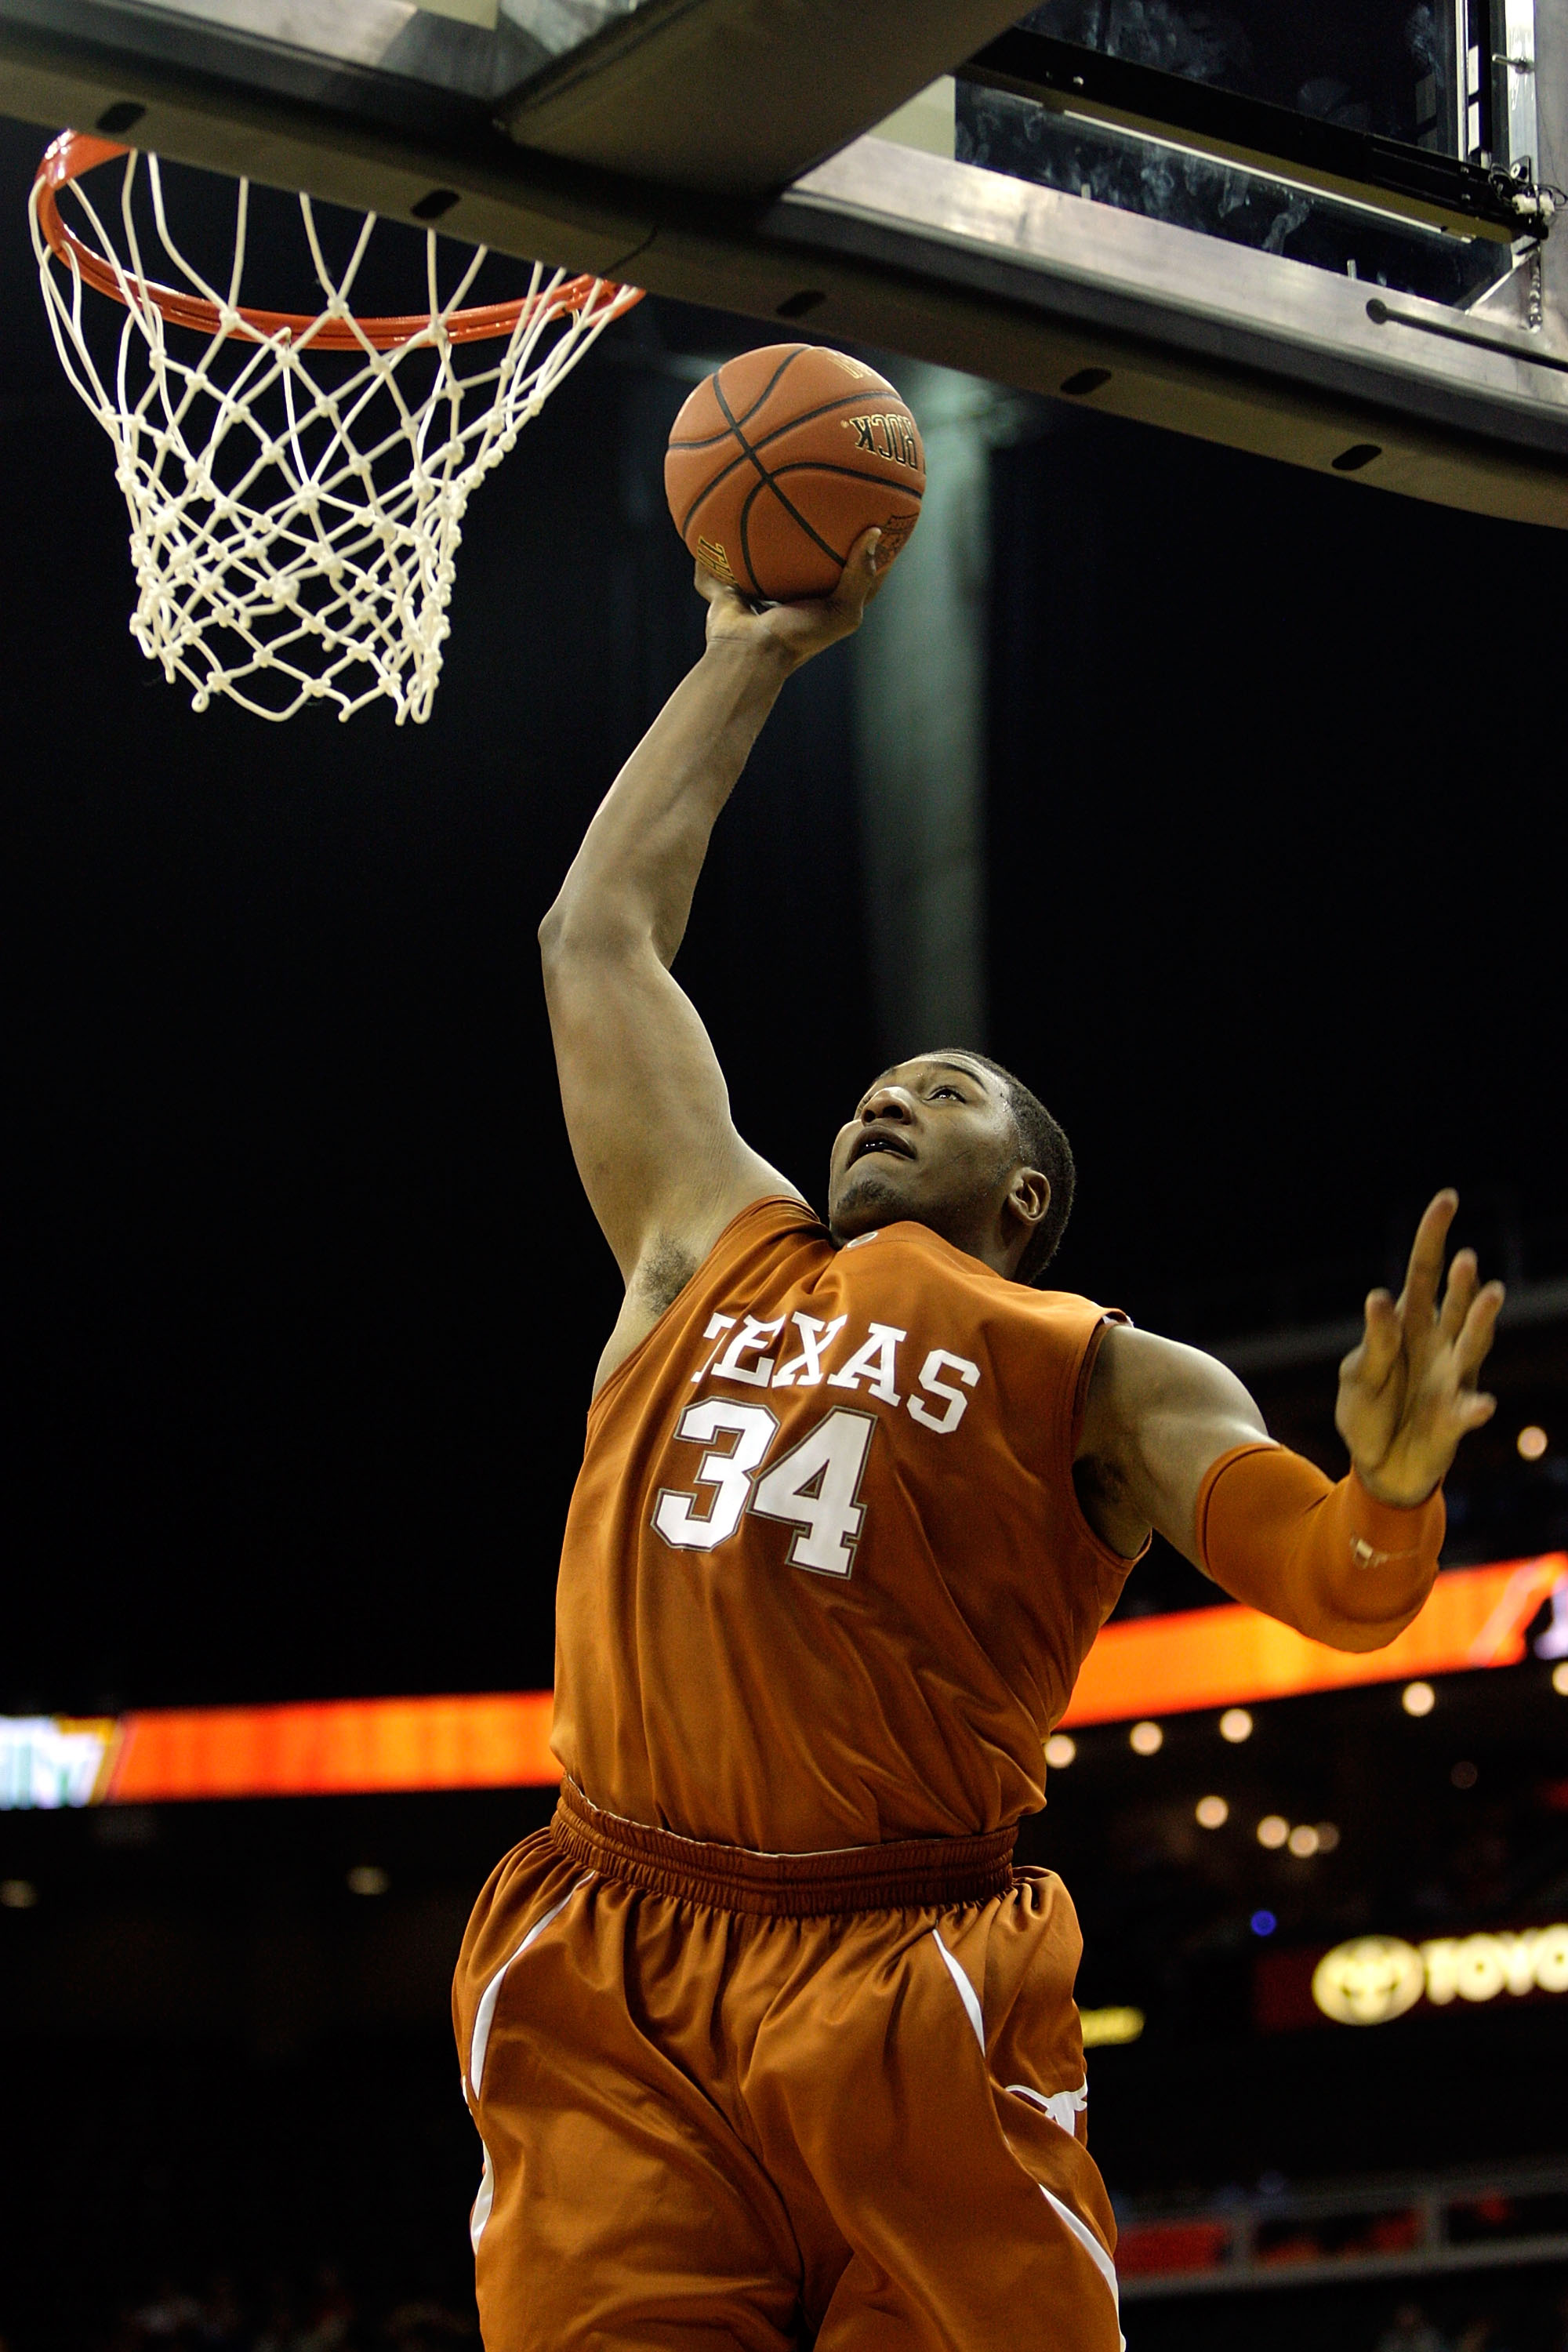 KANSAS CITY, MO - NOVEMBER 23:  Dexter Pittman #34 of the Texas Longhorns goes in for a dunk during the CBE Classic semifinal game against the Iowa Hawkeyes on November 23, 2009 at Sprint Center in Kansas City, Missouri.  (Photo by Jamie Squire/Getty Imag